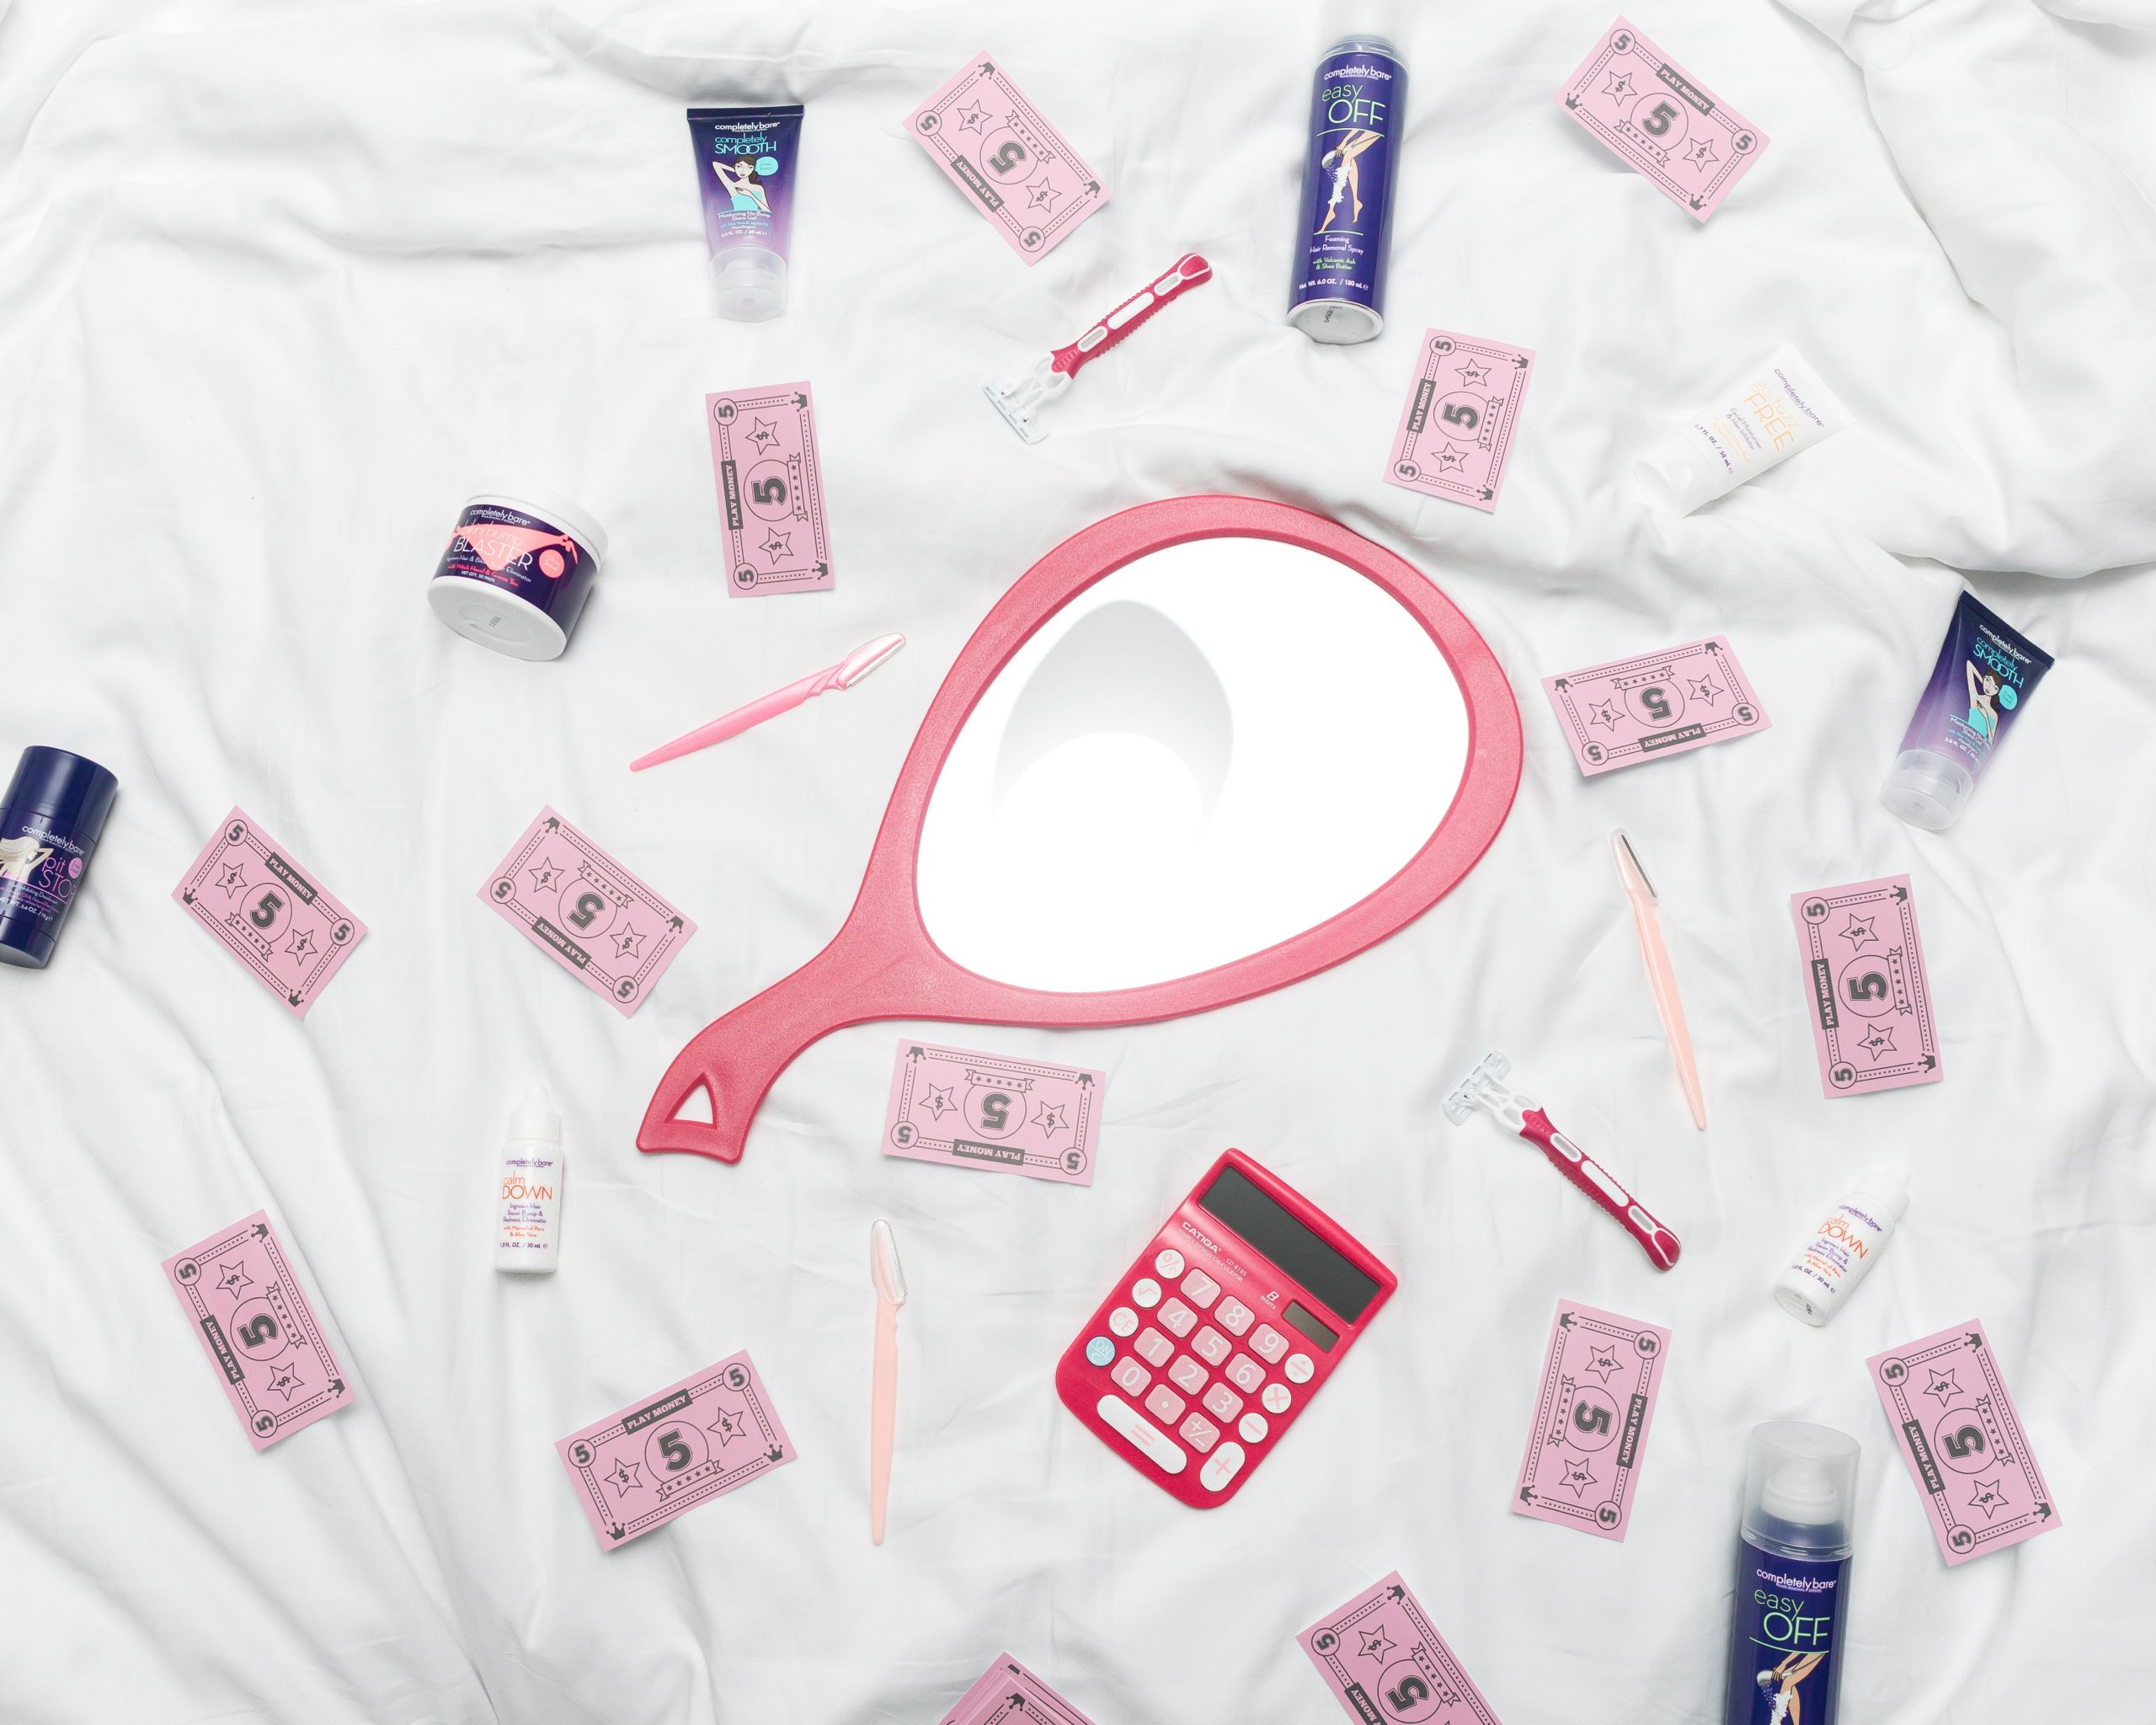 Wholesale for Your Beauty Brand: From Pricing Advice to Finding Retailers